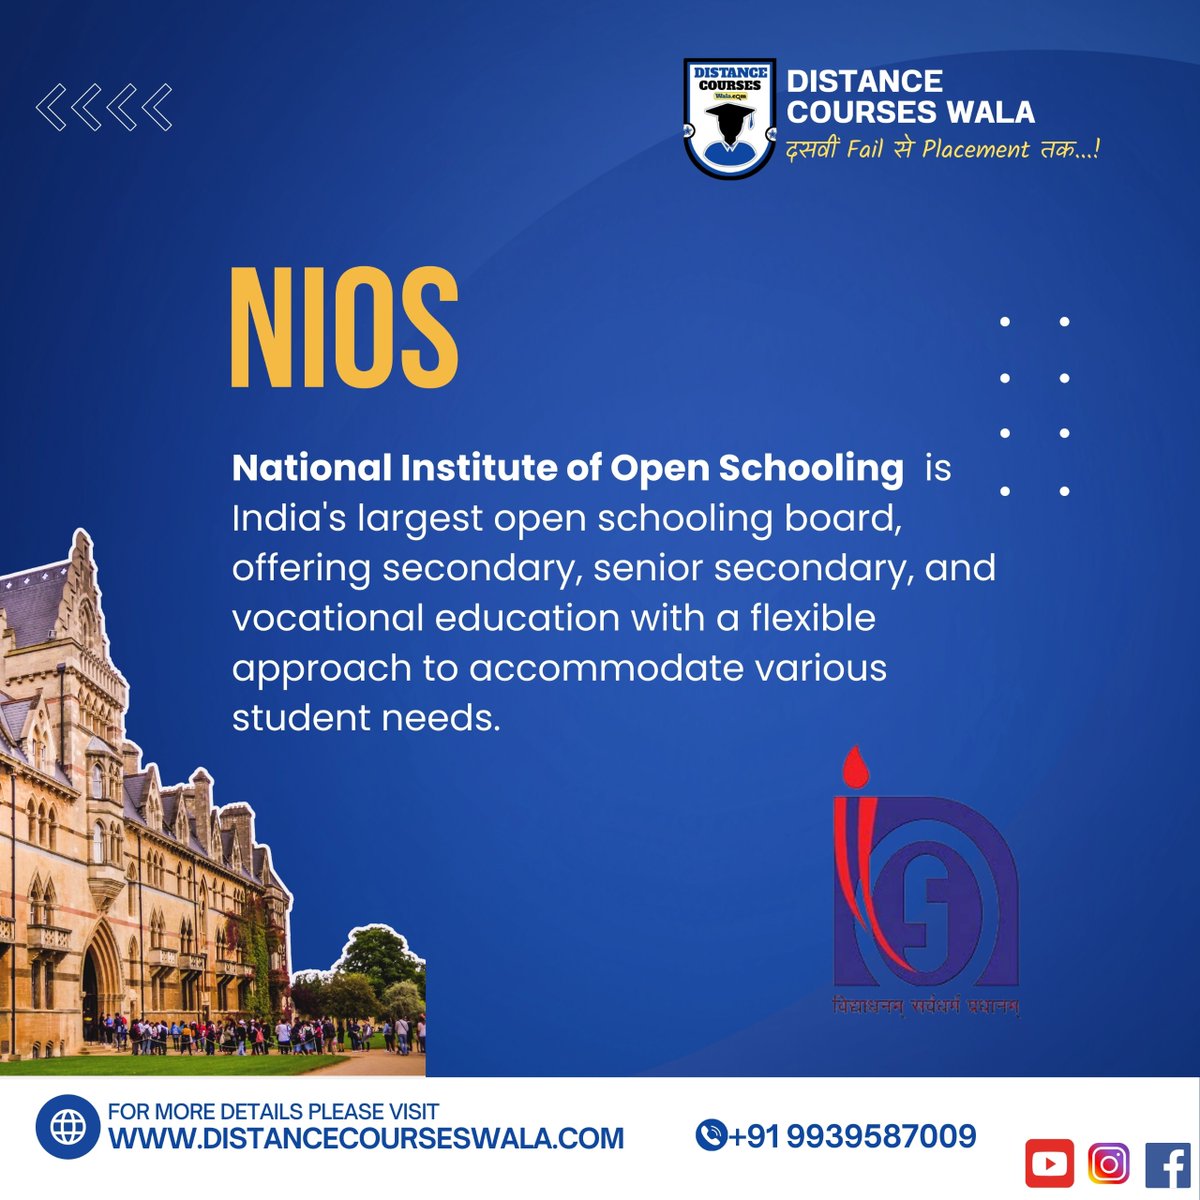 'NIOS: Your pathway to flexible learning! 🌟 At Distance Courses Wala, we offer a variety of courses through NIOS, India's largest open schooling board. Get the education you need at your own pace. Contact us to begin your journey! 📞 #NIOS #FlexibleEducation #DistanceLearning